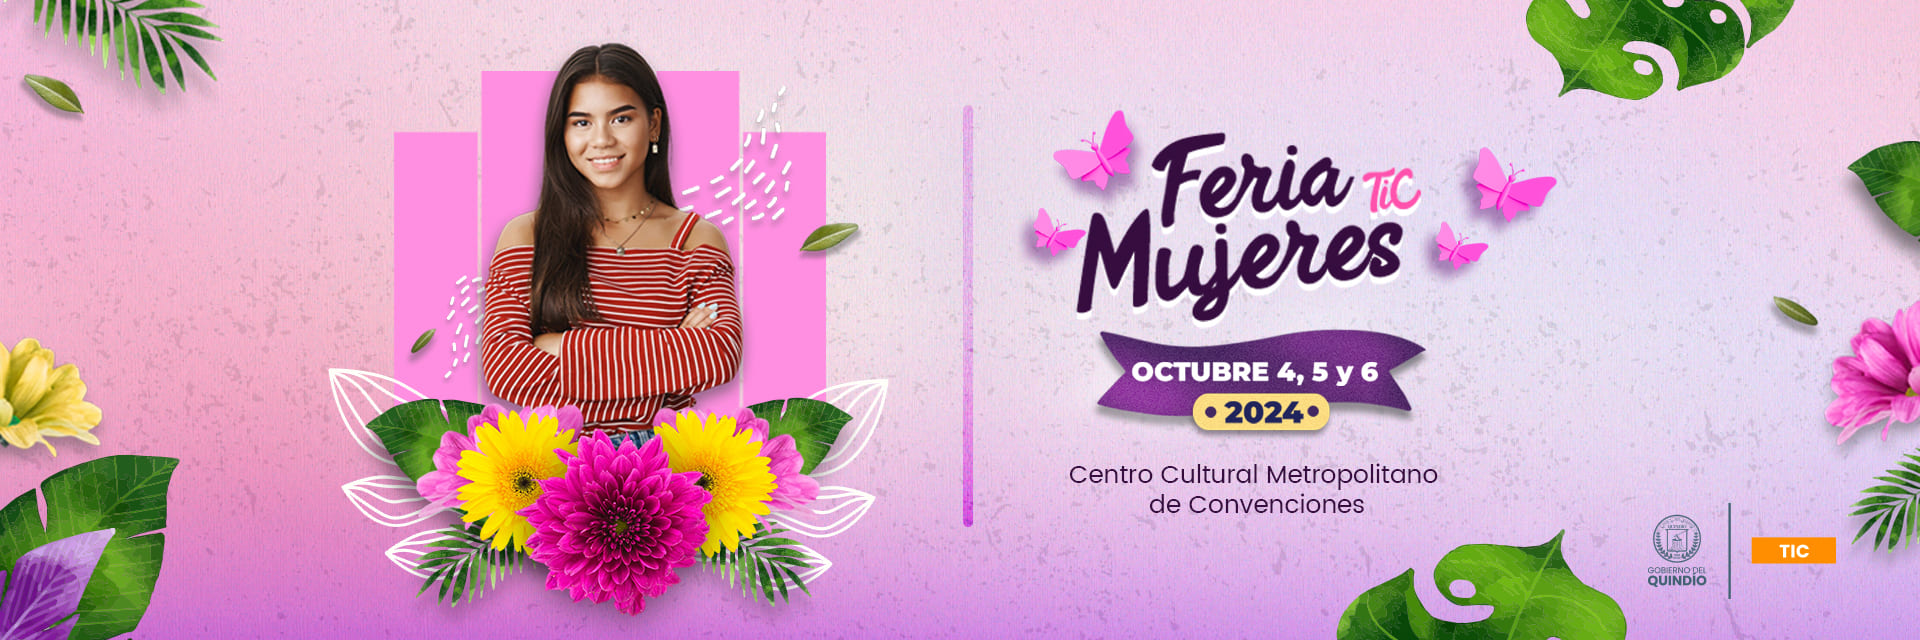 banner feria mujeres